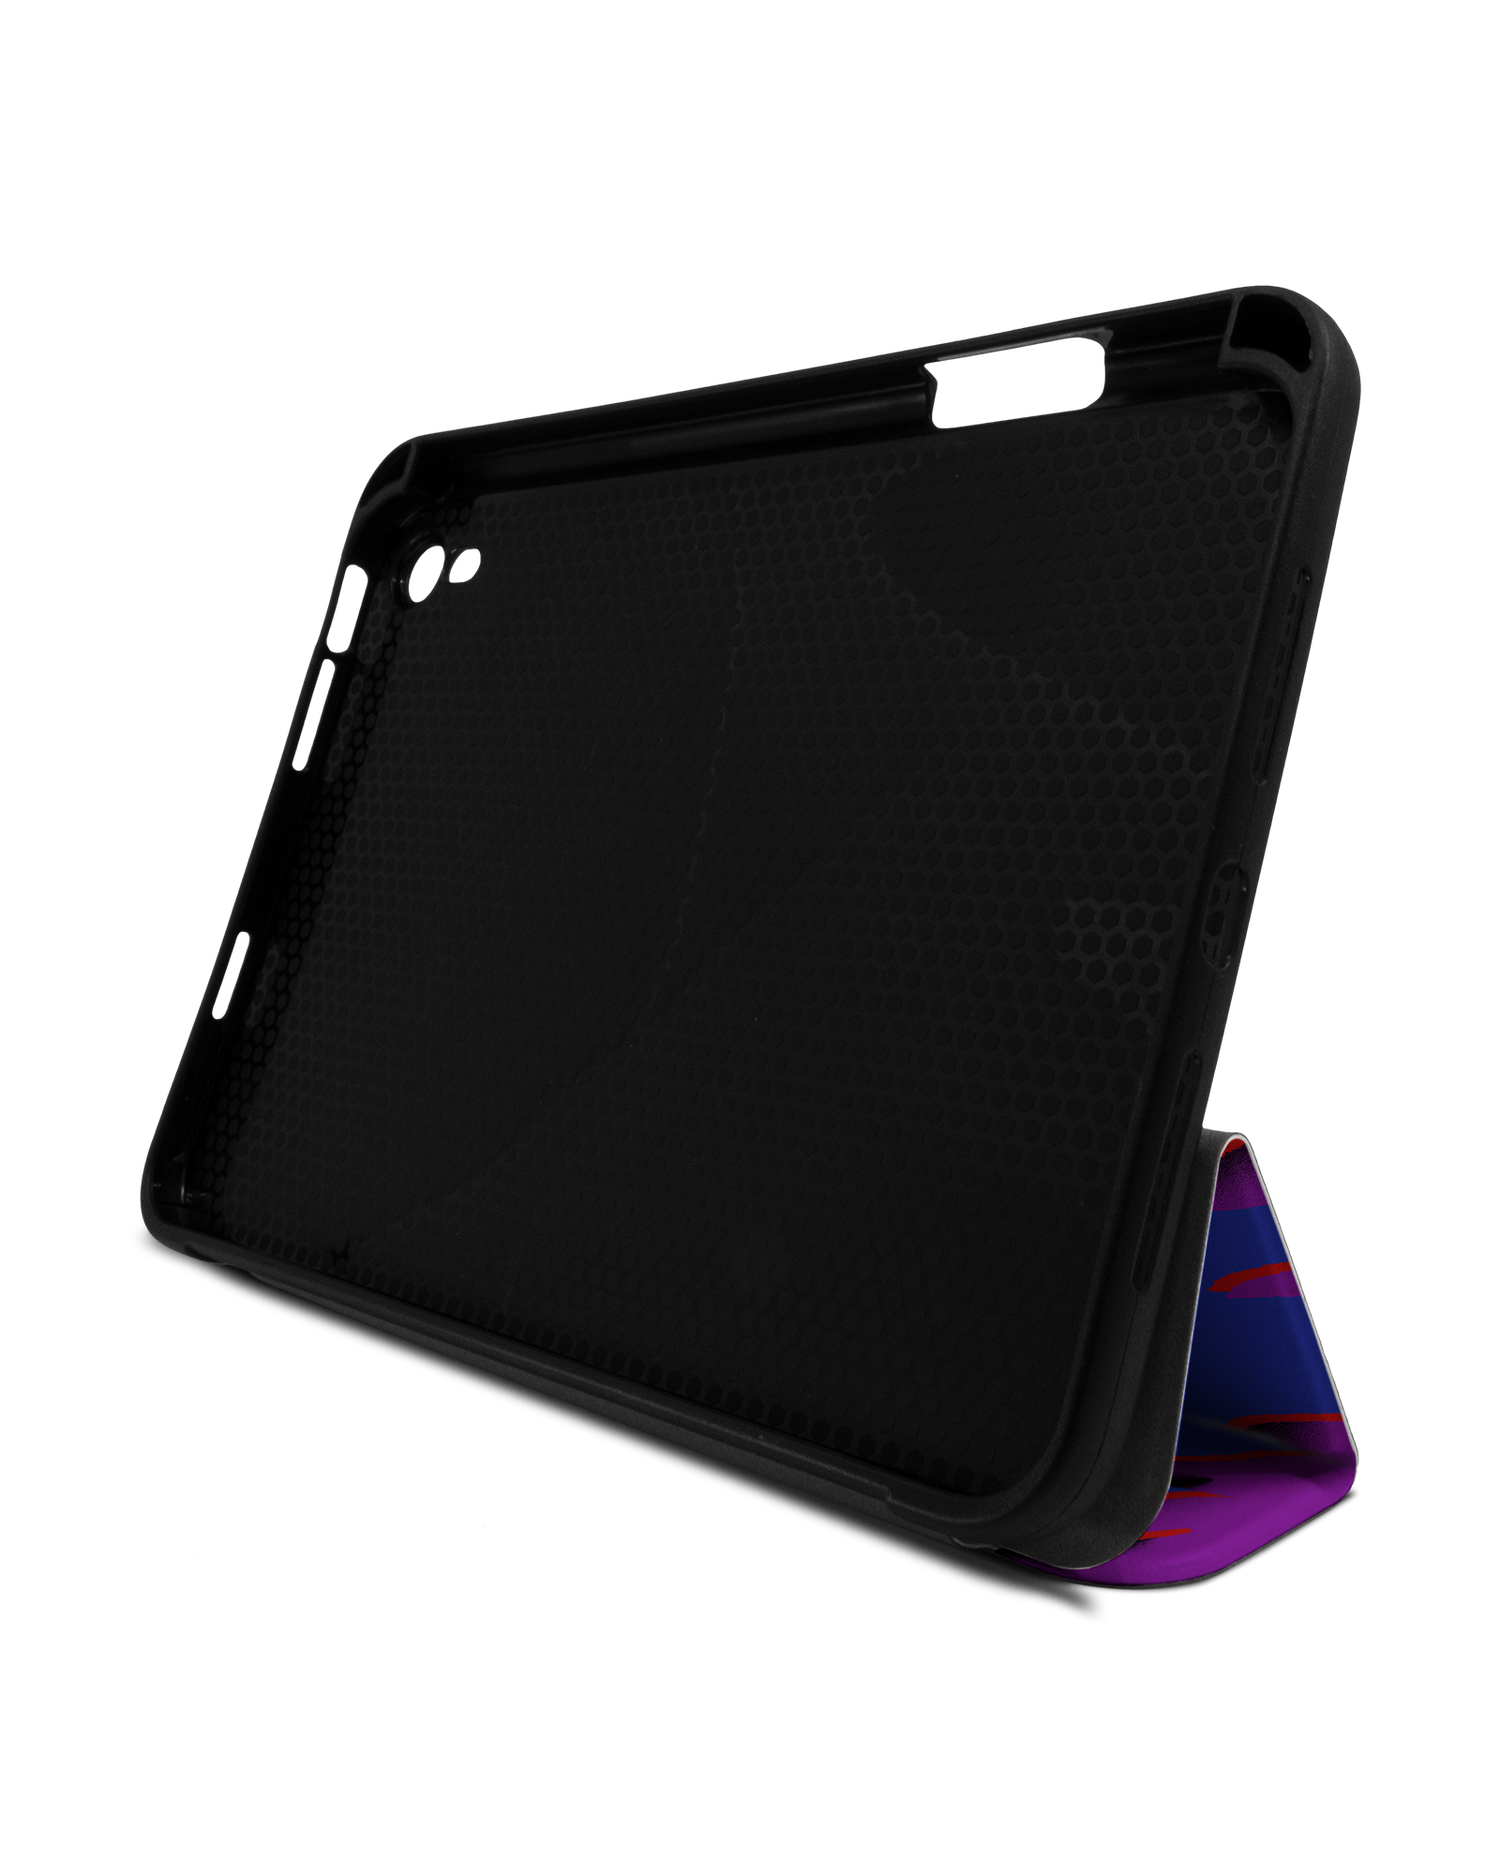 Electric Ocean 2 iPad Case with Pencil Holder Apple iPad mini 6 (2021): Set up in landscape format (front view)